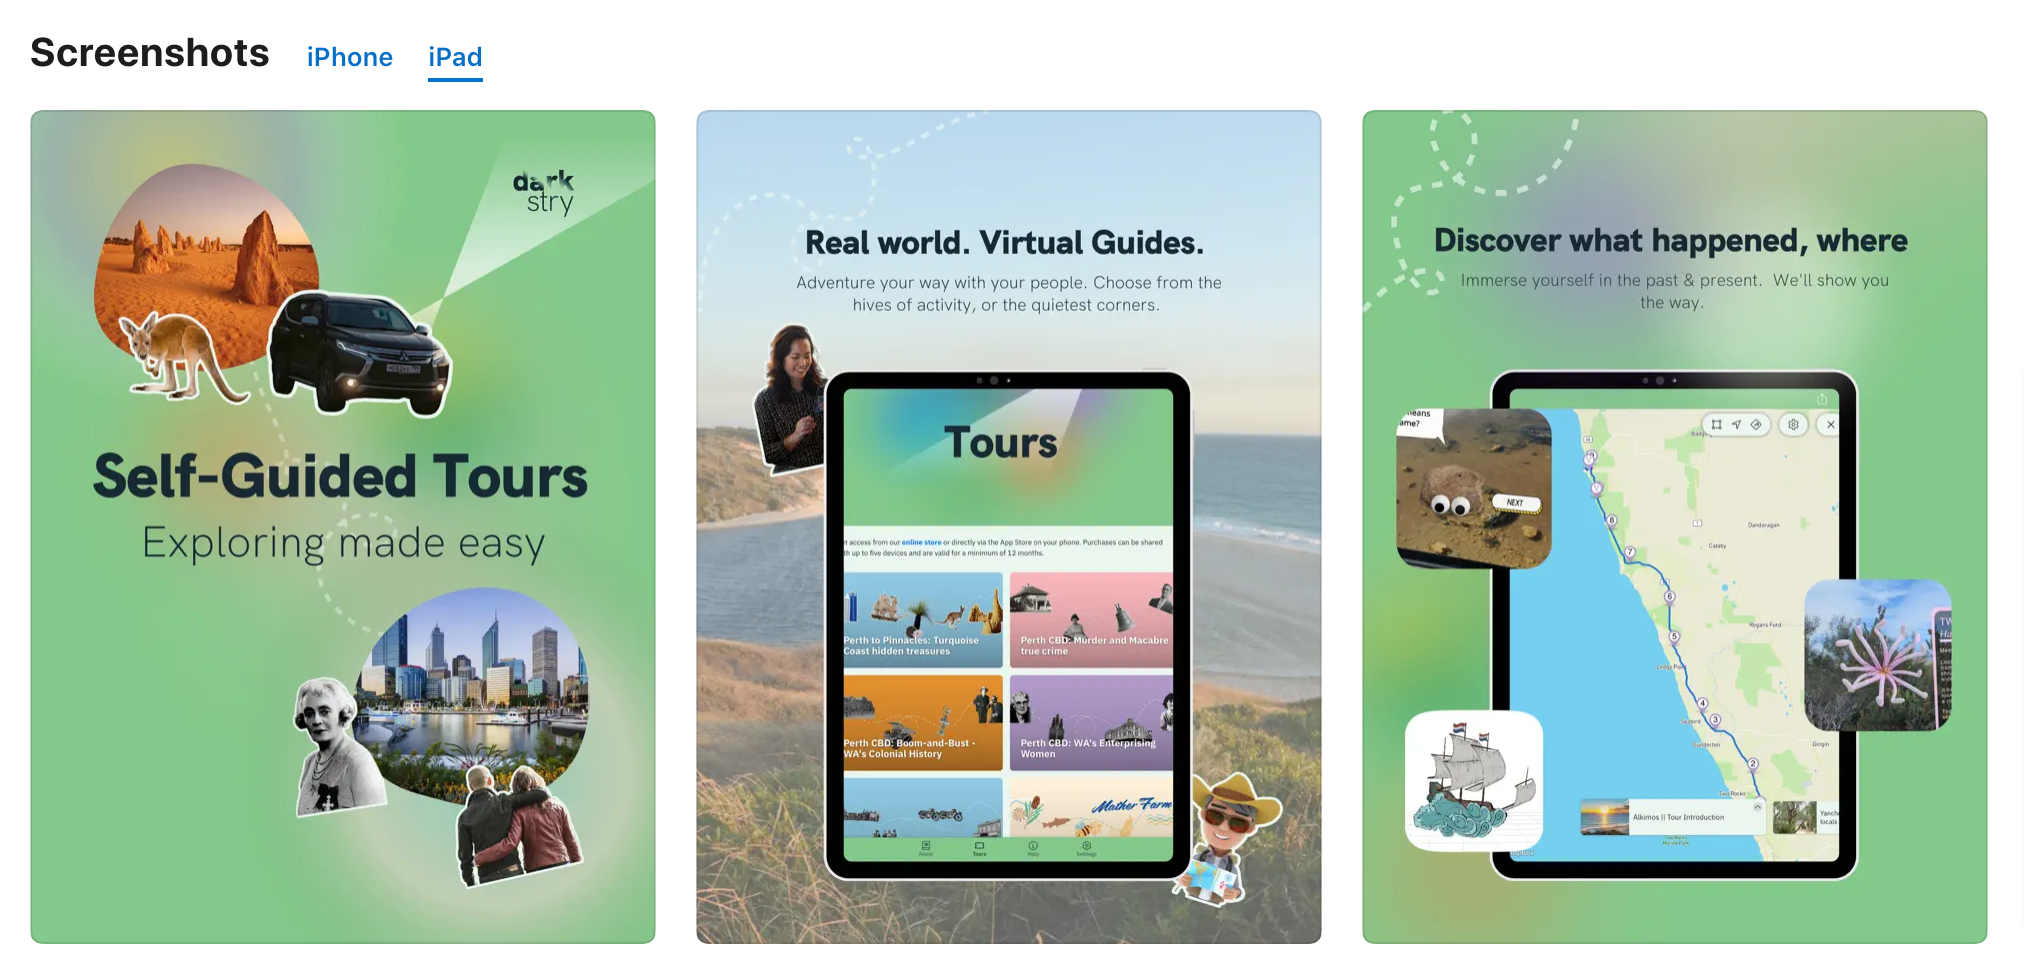 Dark Stry _ Self-Guided Tours on the App Store (2).png